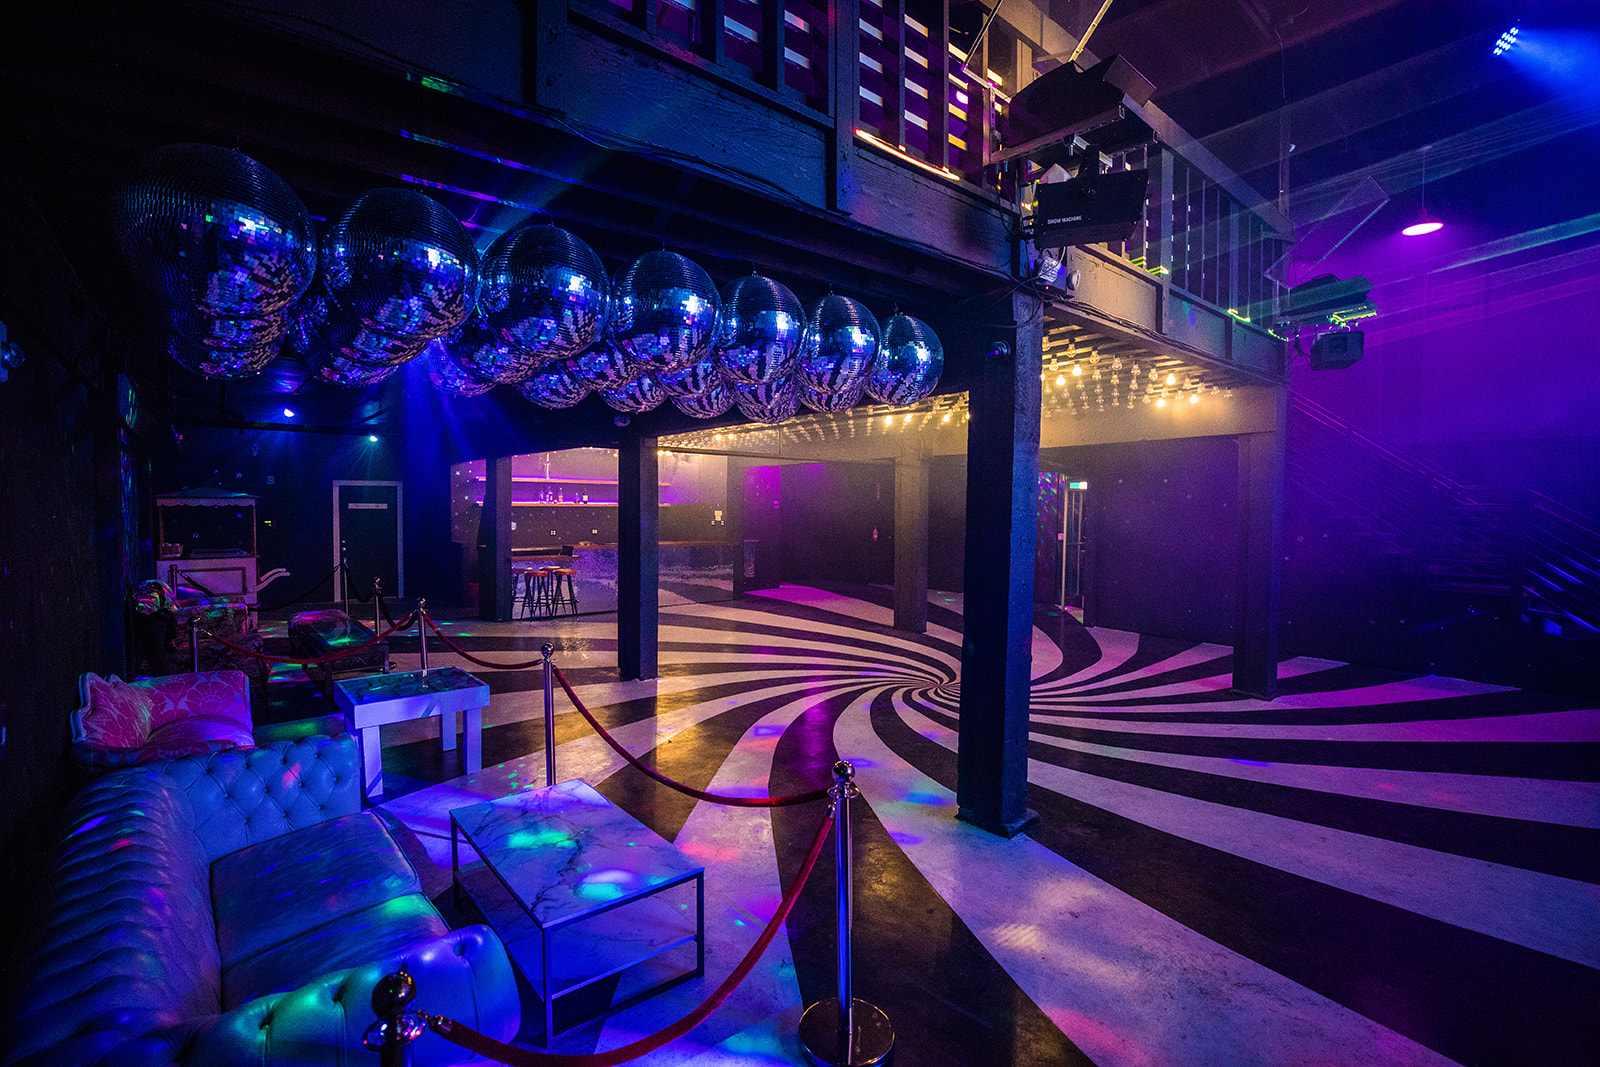 Supernova, Seattle's First Immersive Atmospheric Arts And Entertainment Venue Opening In SODO